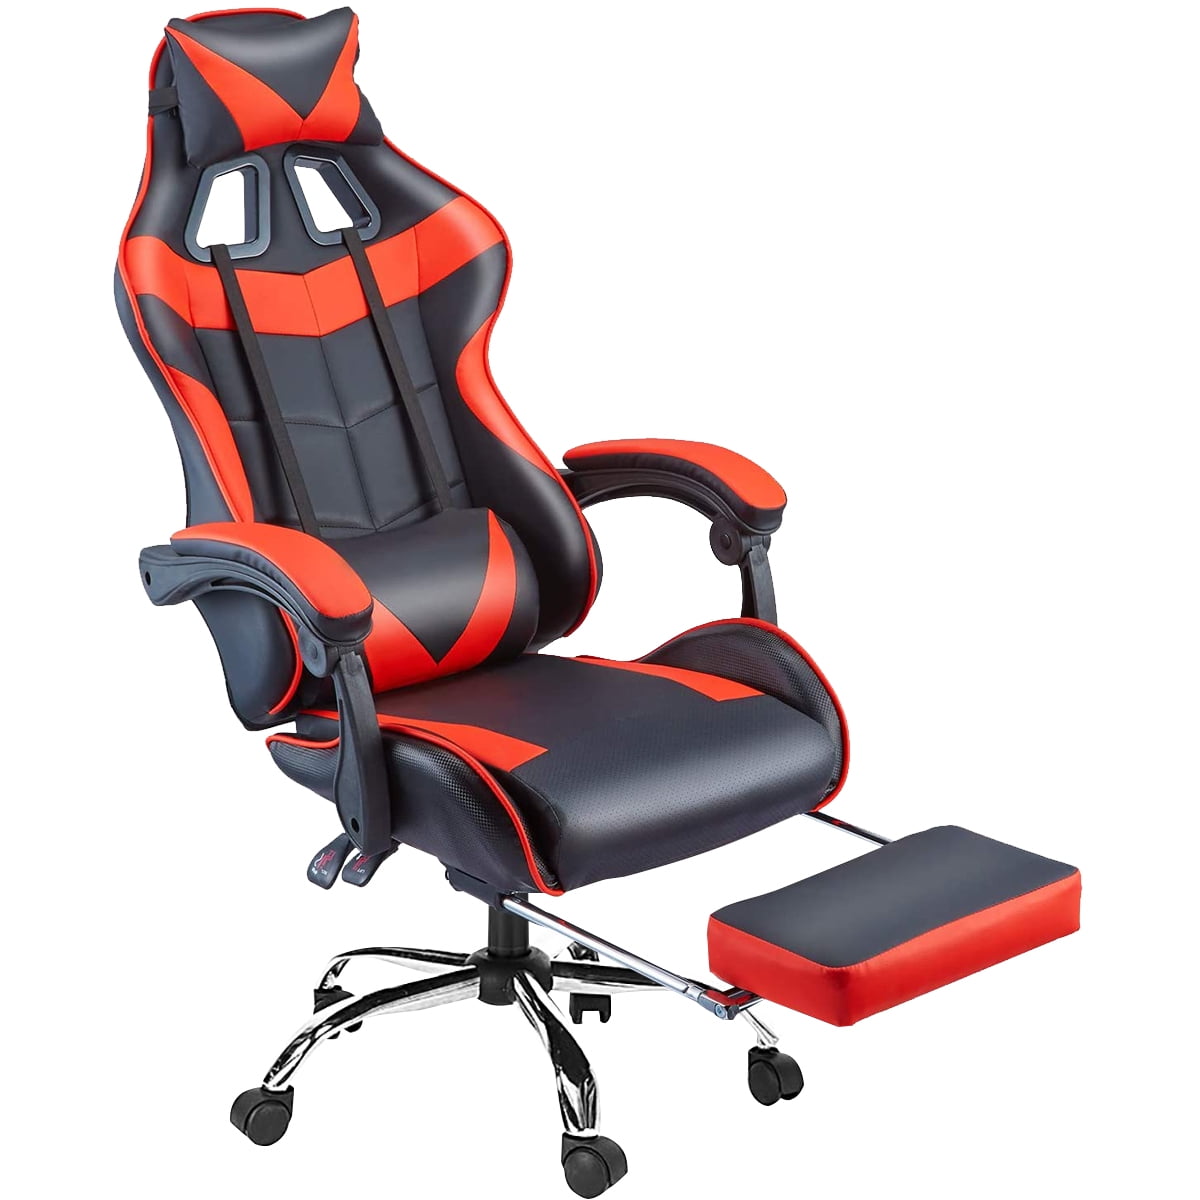 Ergonomic Pro Gaming Chair Gamer Seat  Pillows Foot Rest High Back PU Leather 